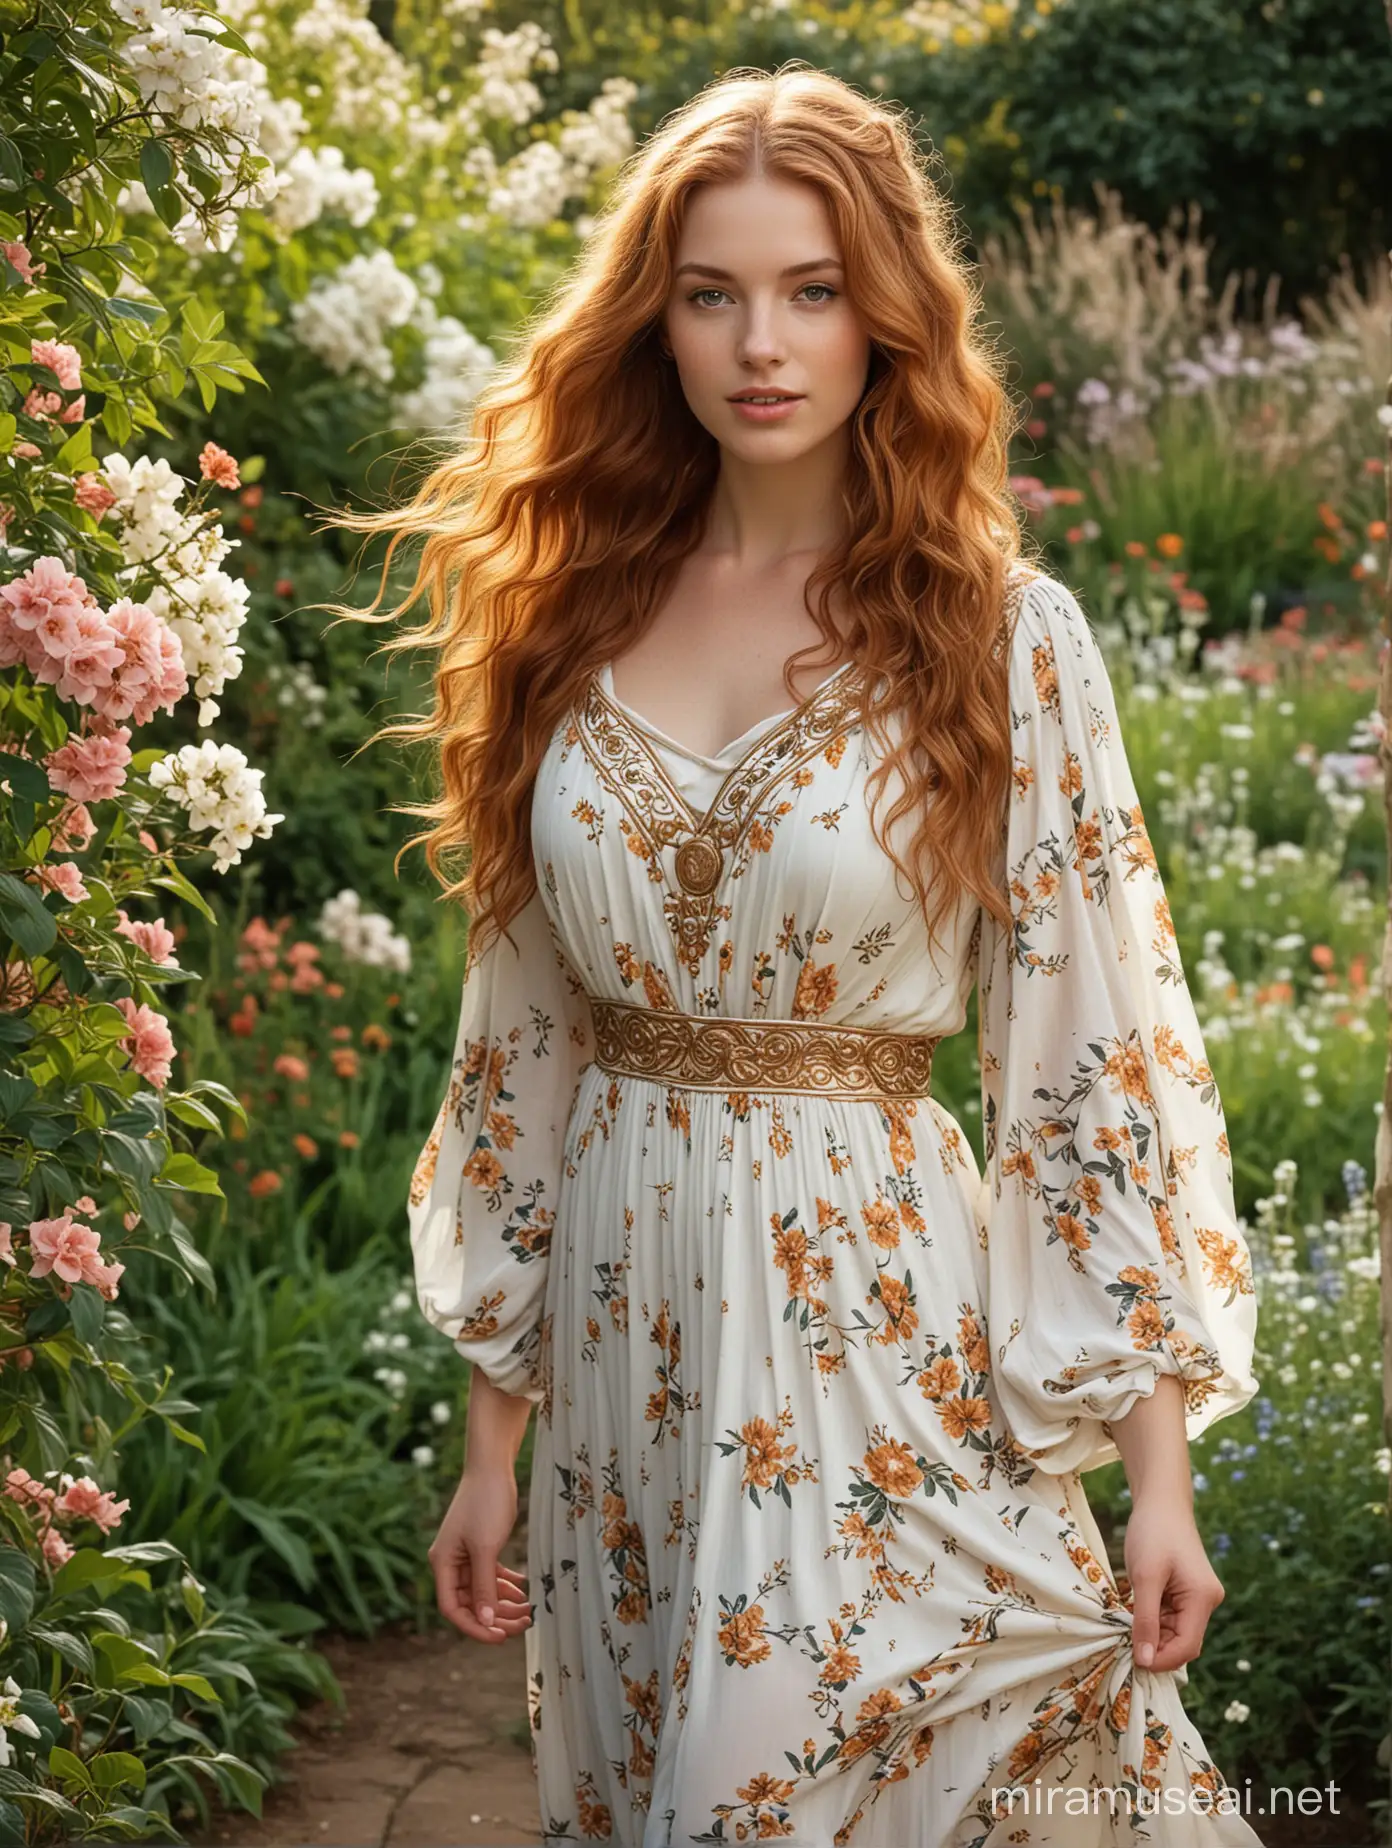 18-year-old girl Julie Roberts with long, wavy auburn beautiful hair, and intense beautiful darkeyes. Friendly face. She is wearing an ancient Greece dress while walking in a beautiful flower garden